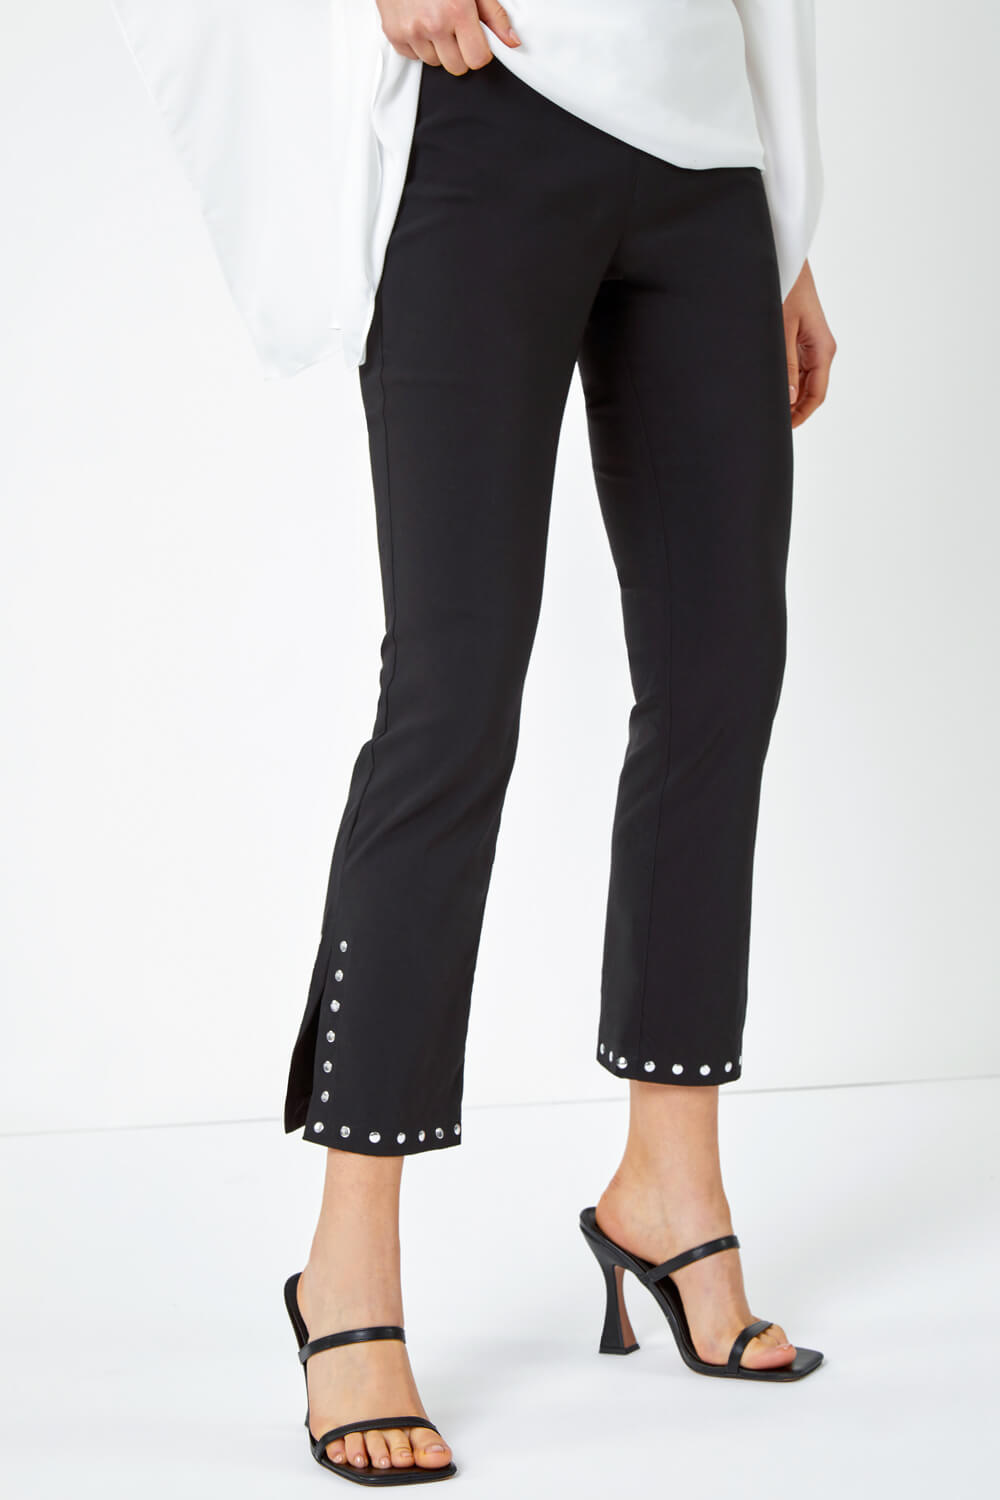 Black Stud Detail Cropped Stretch Trousers, Image 5 of 5